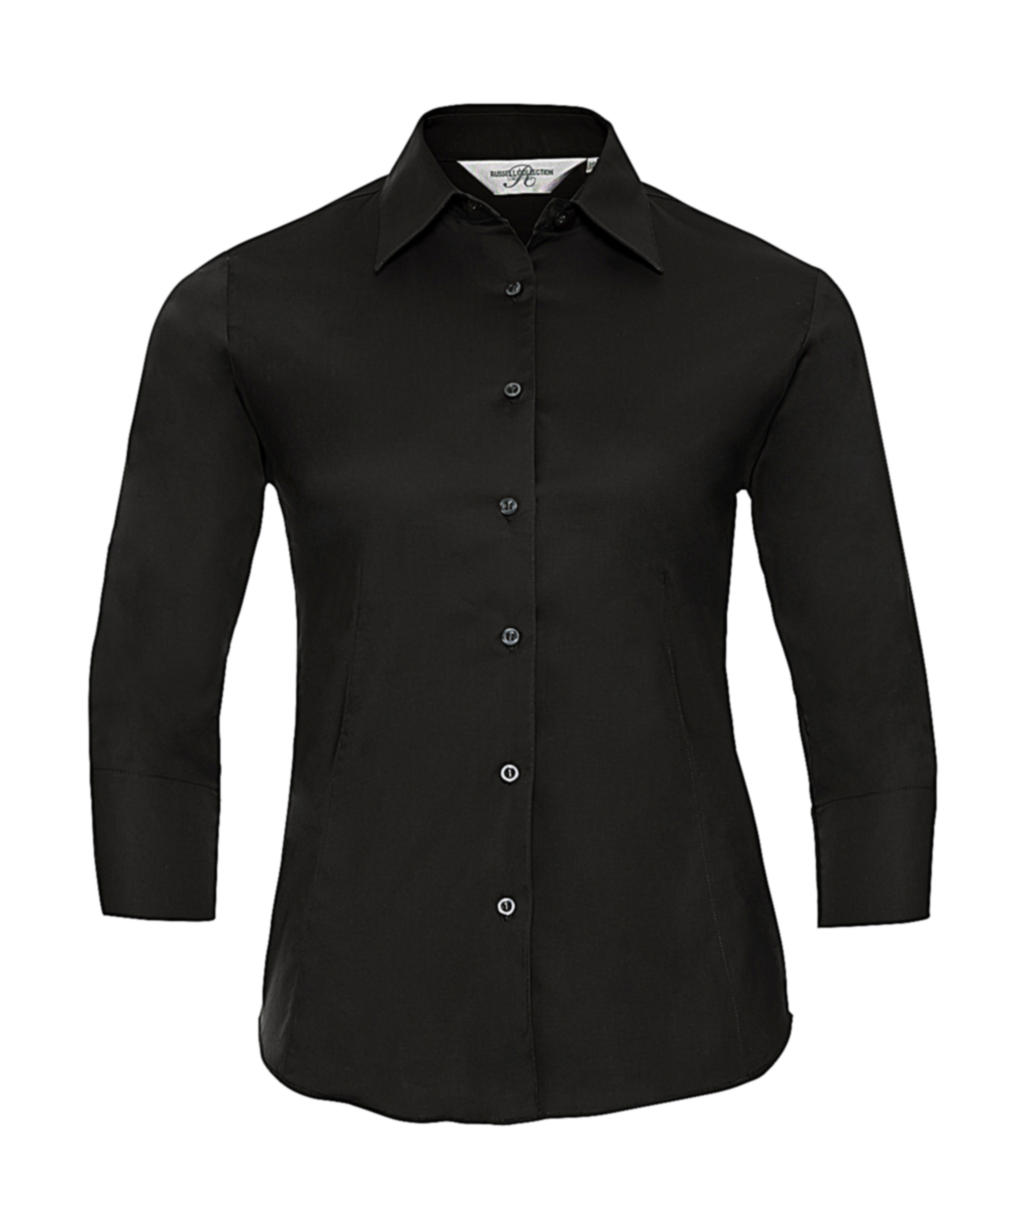  Ladies 3/4 Sleeve Easy Care Fitted Shirt in Farbe Black